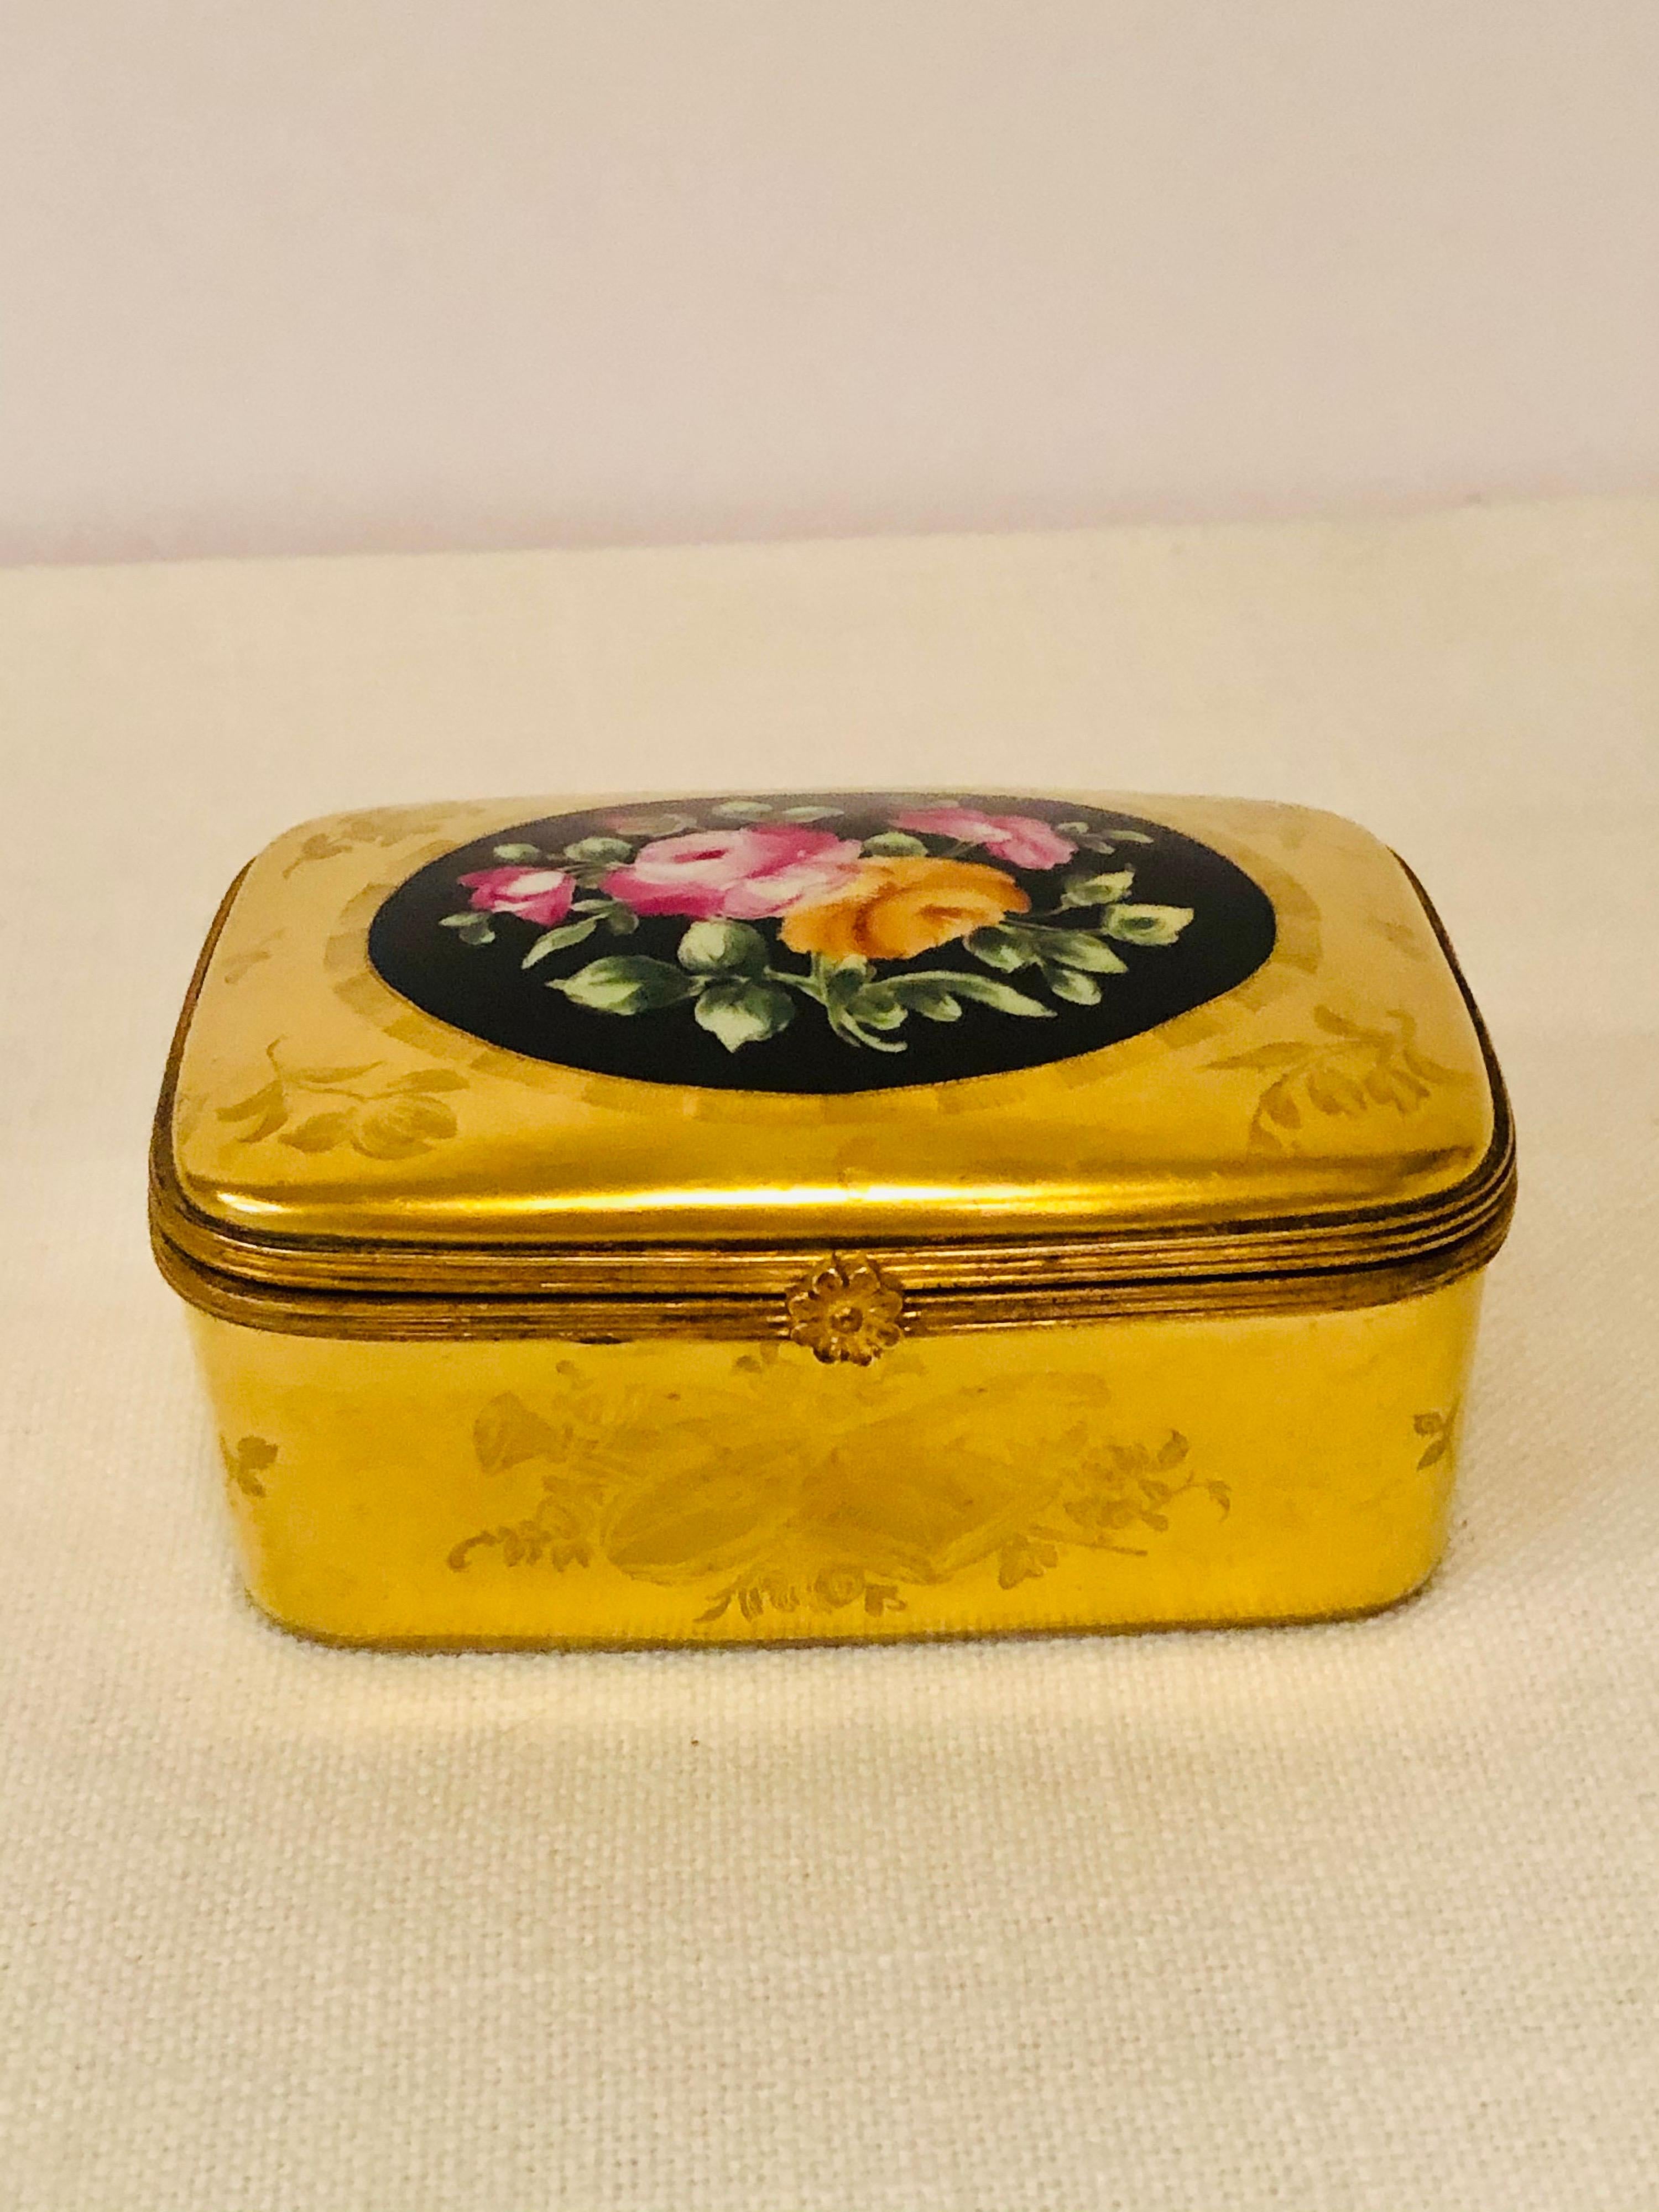 Le Tallec Box with a Gold BackGround and a Central Painting of a Flower Bouquet 6